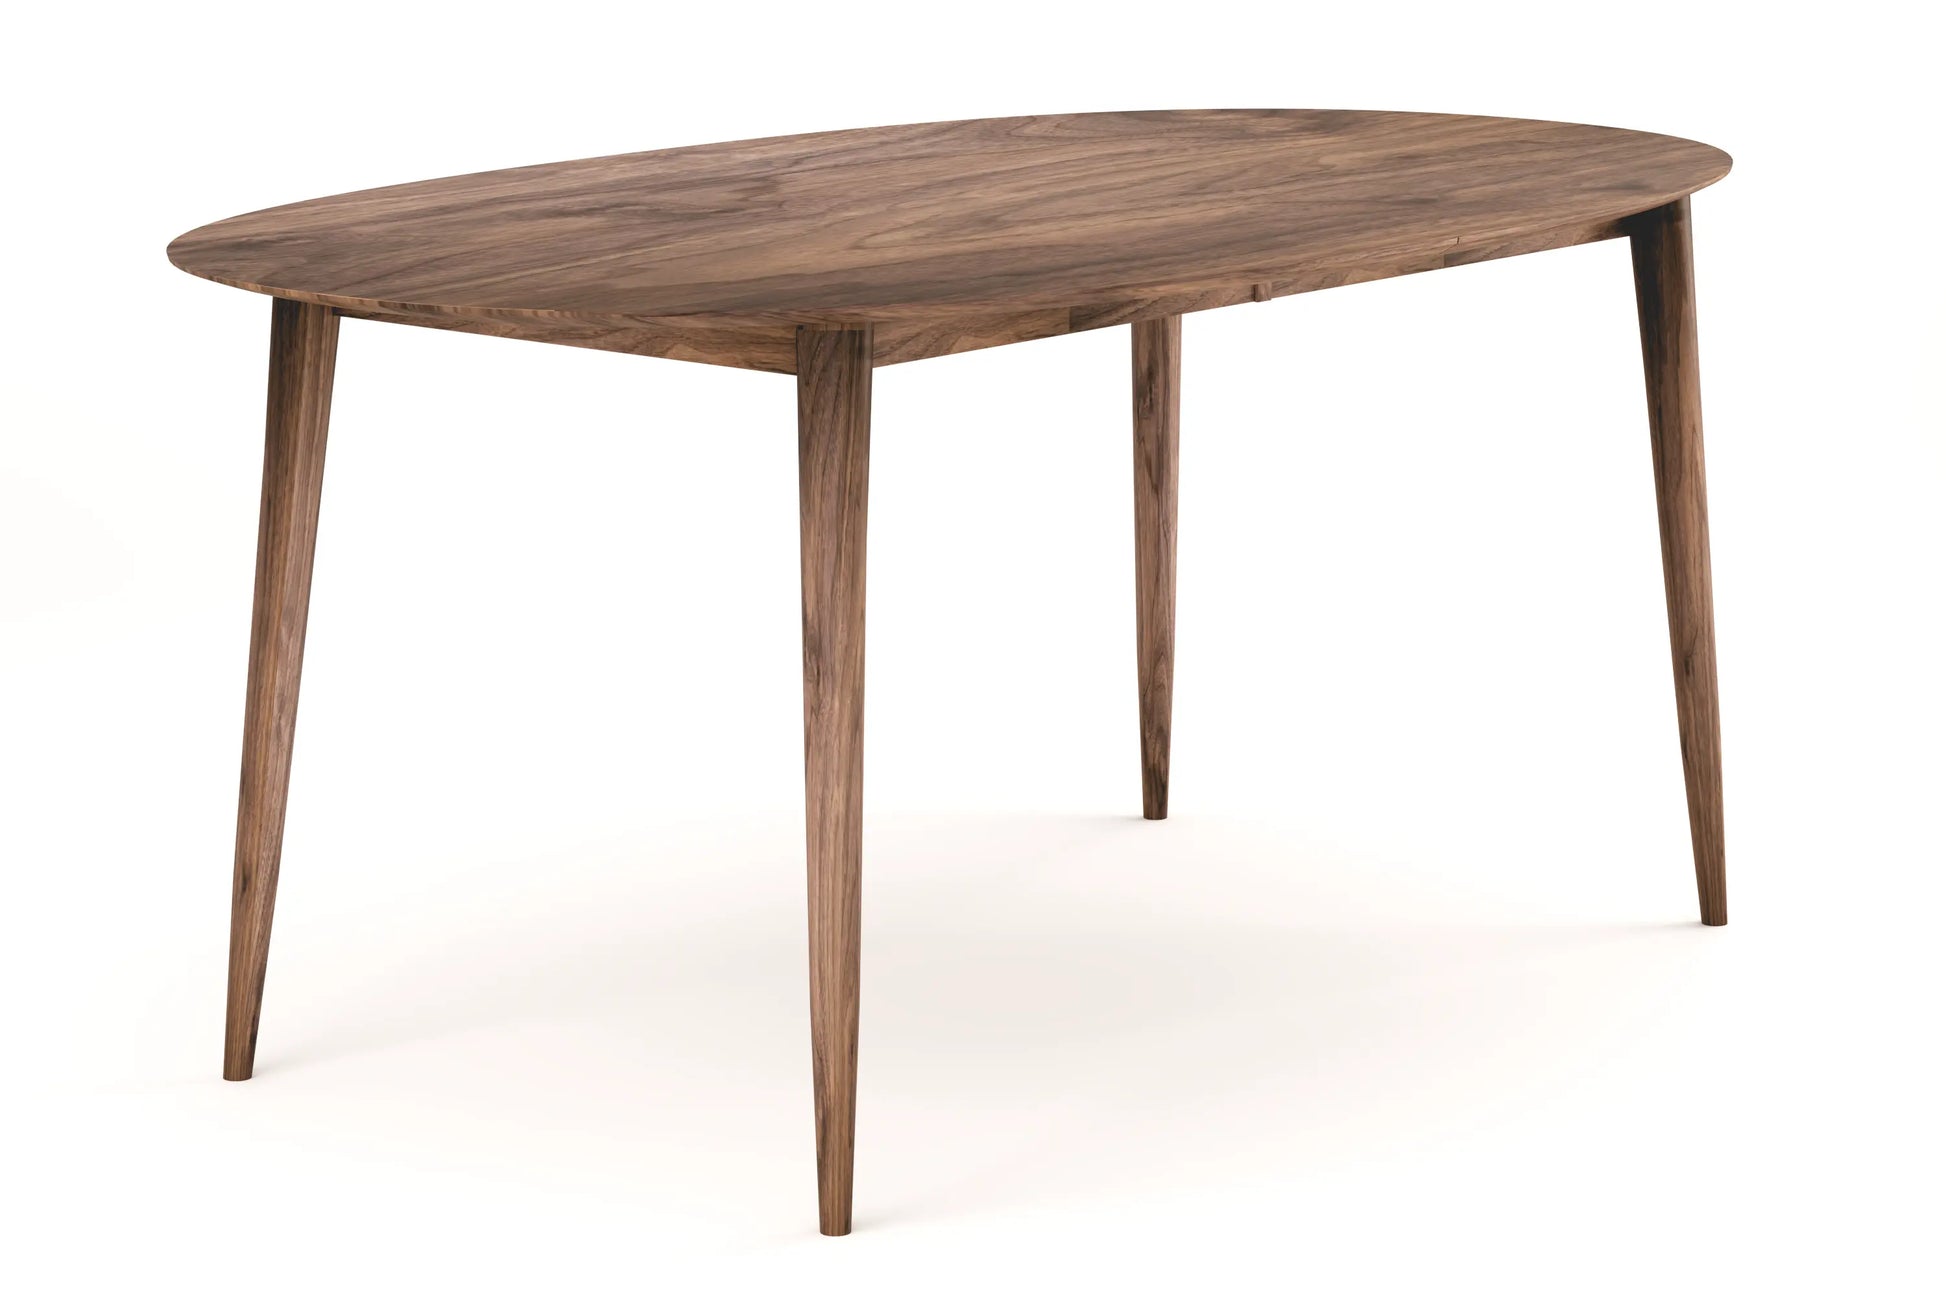 The Vista - Mid century Modern Dining Table, Extendable dining table Moderncre8ve